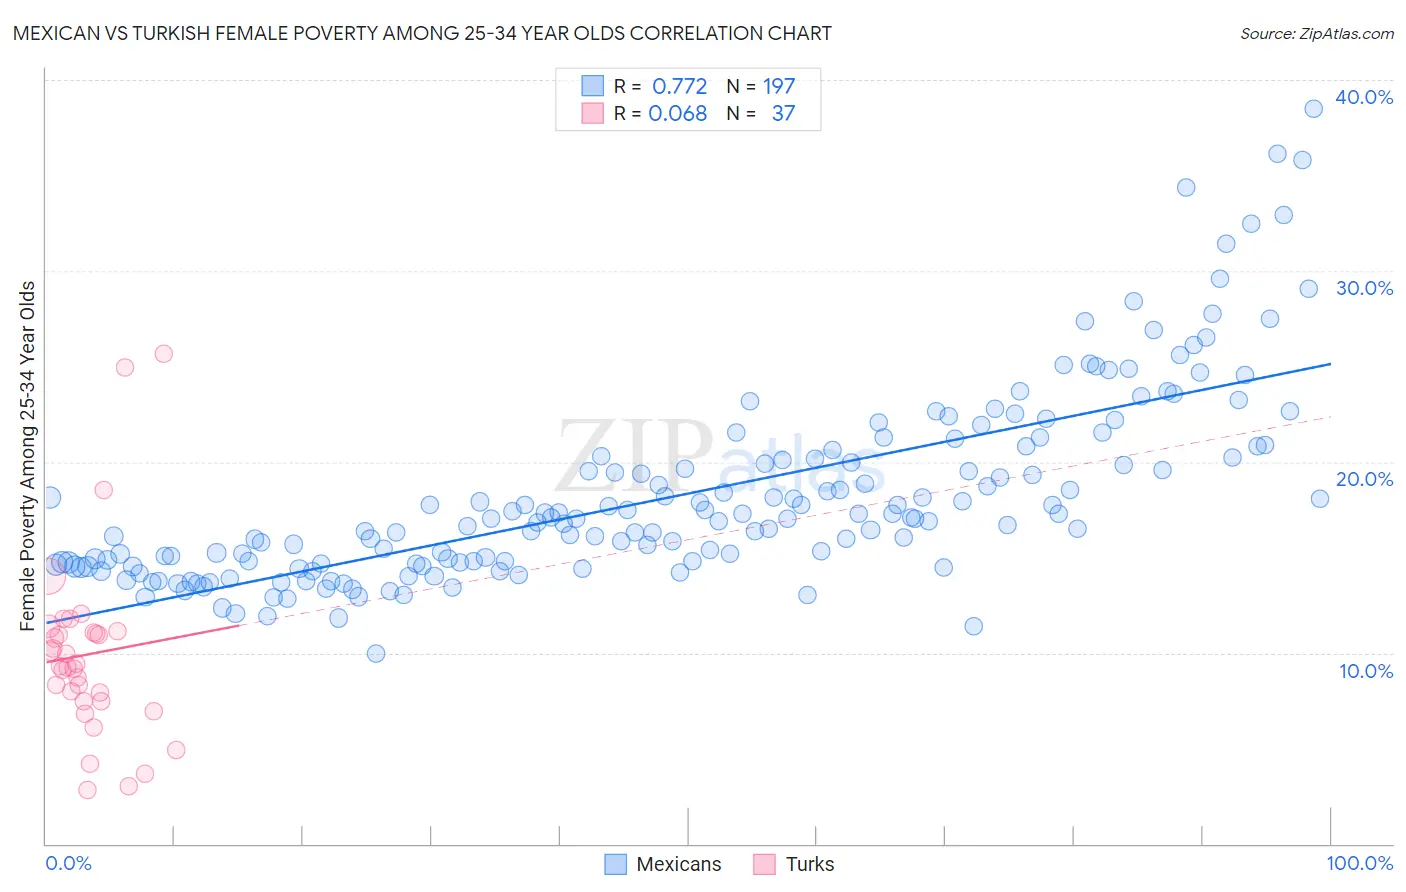 Mexican vs Turkish Female Poverty Among 25-34 Year Olds